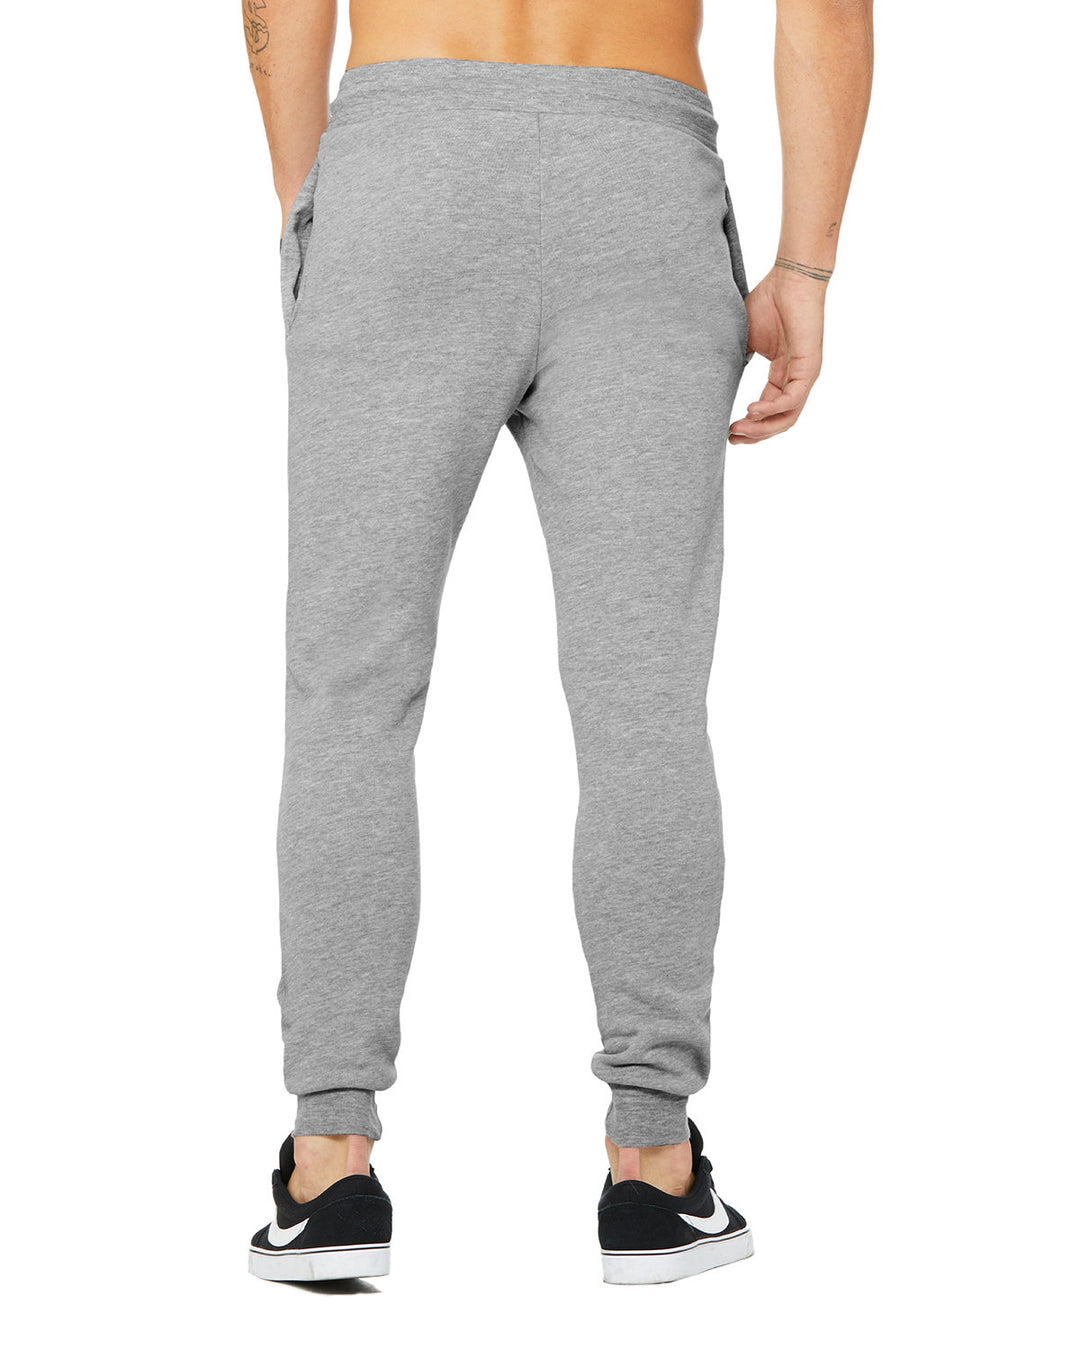 Needham Track and Field Joggers (3727)